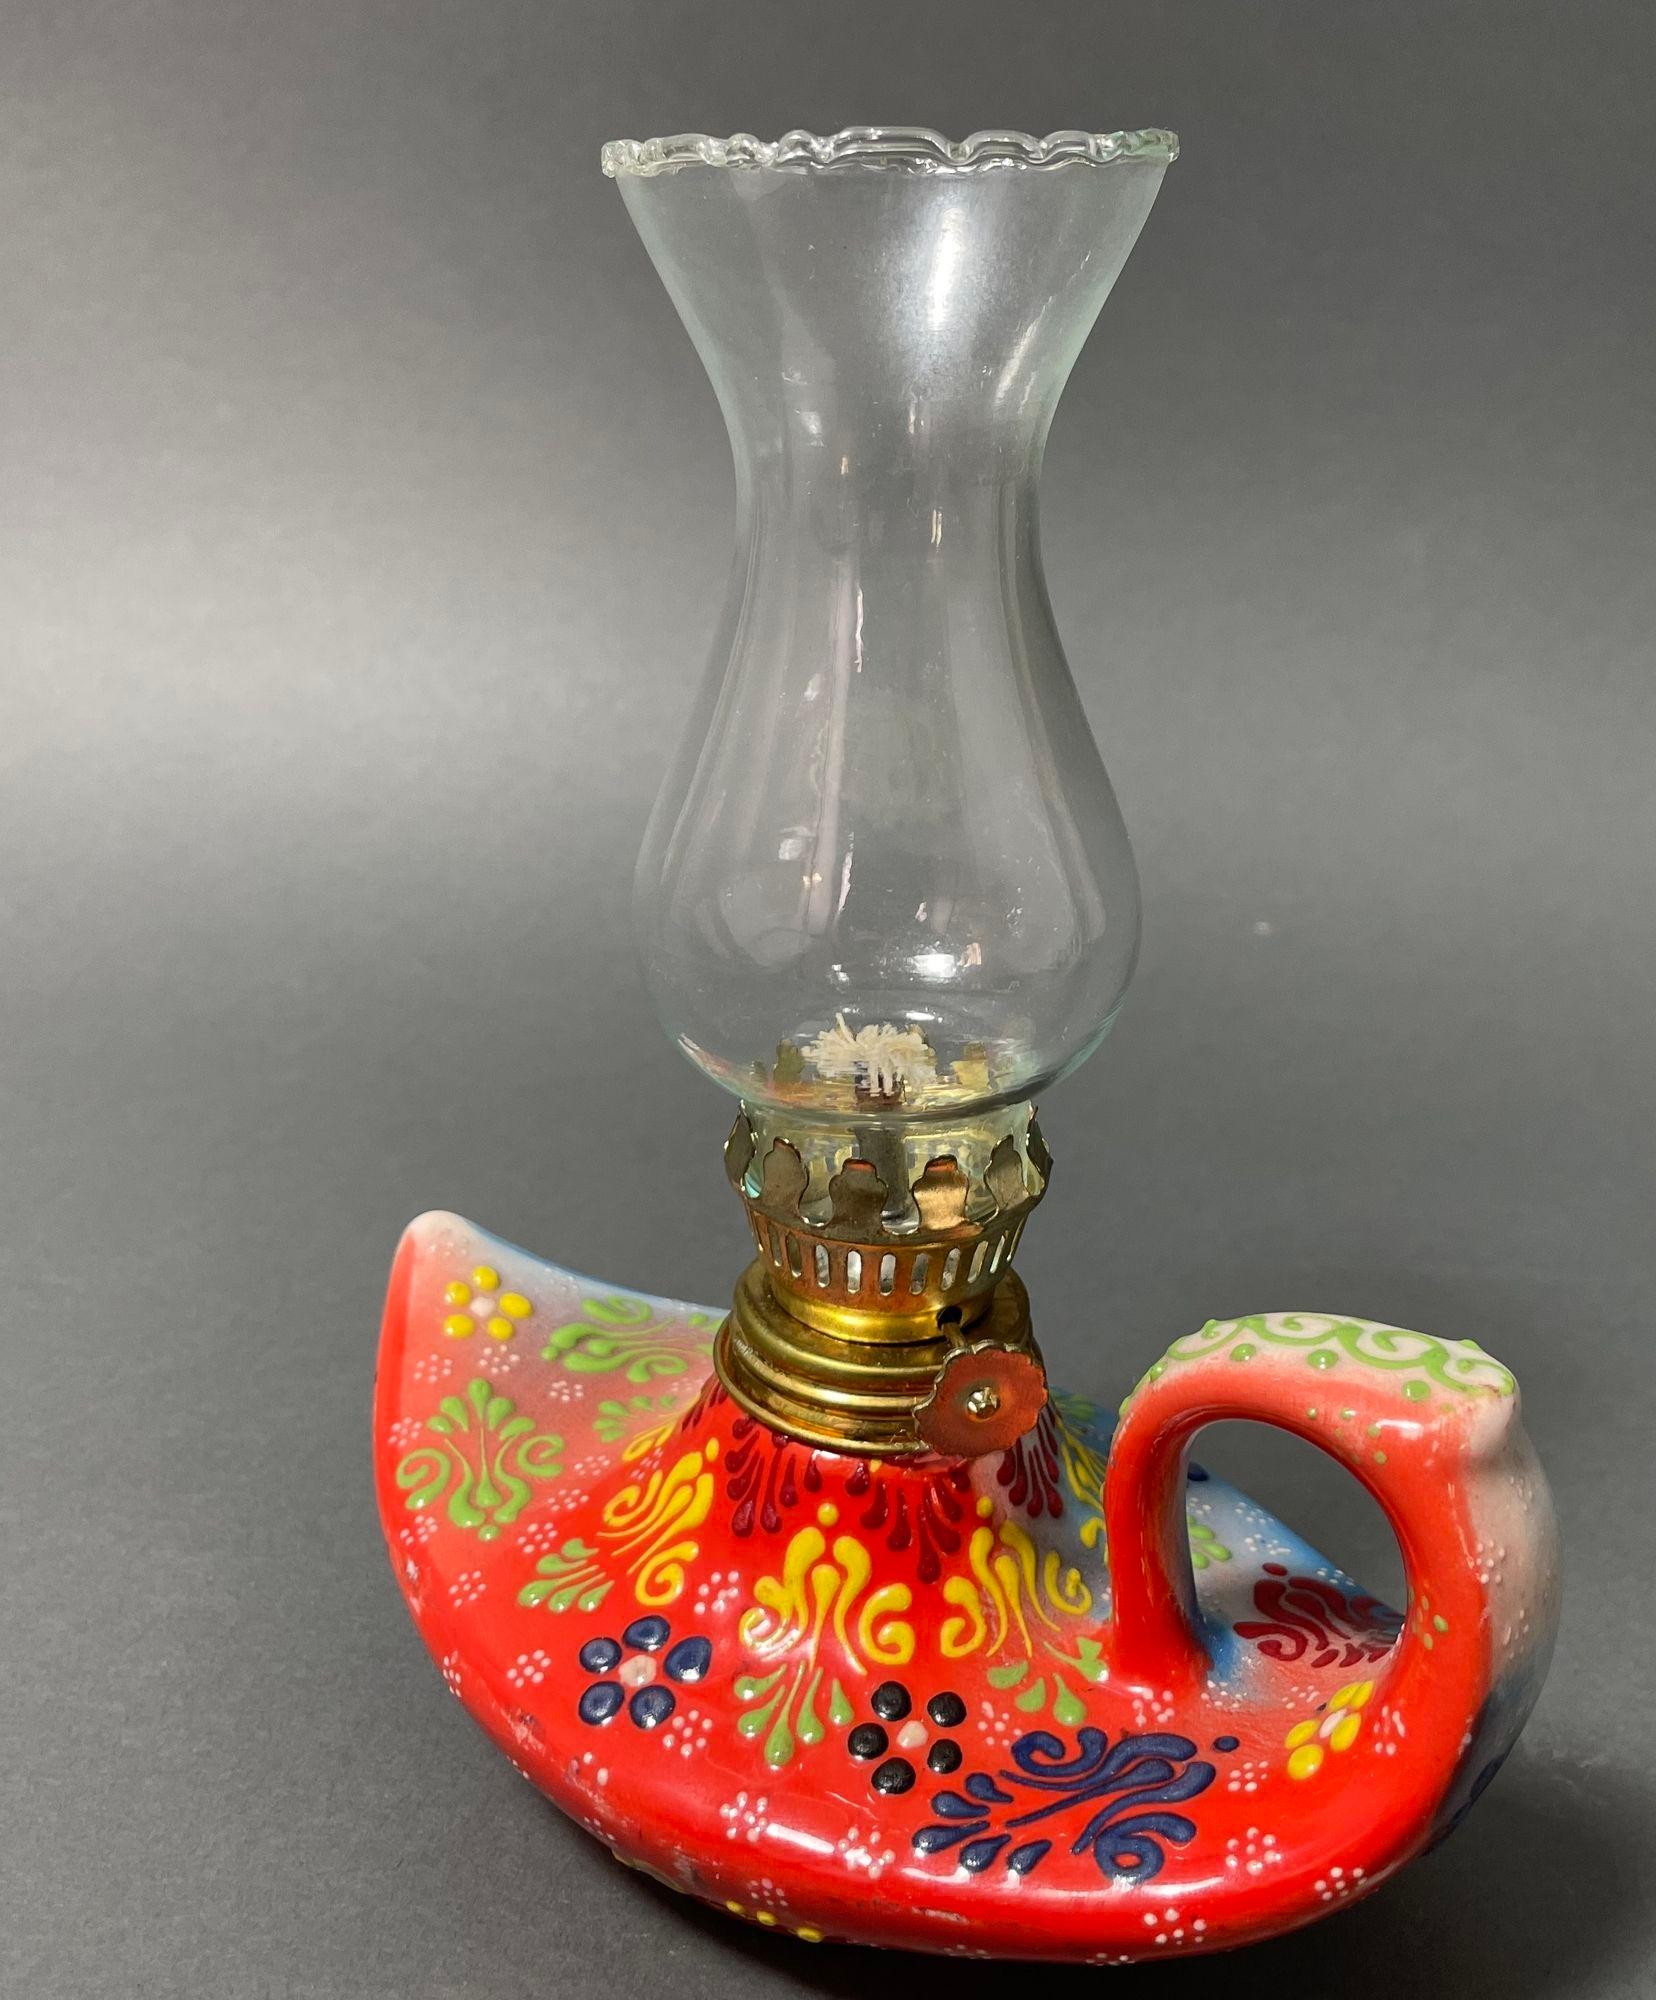 Vintage Aladdin style handmade red ceramic Turkish oil lamp, hurricane oil lamp lantern.
This oil lamp has a pottery base that evokes an Aladdin's Lamp out of the Arabian Nights.
Textured hand-painted ceramic with traditional Turkish floral